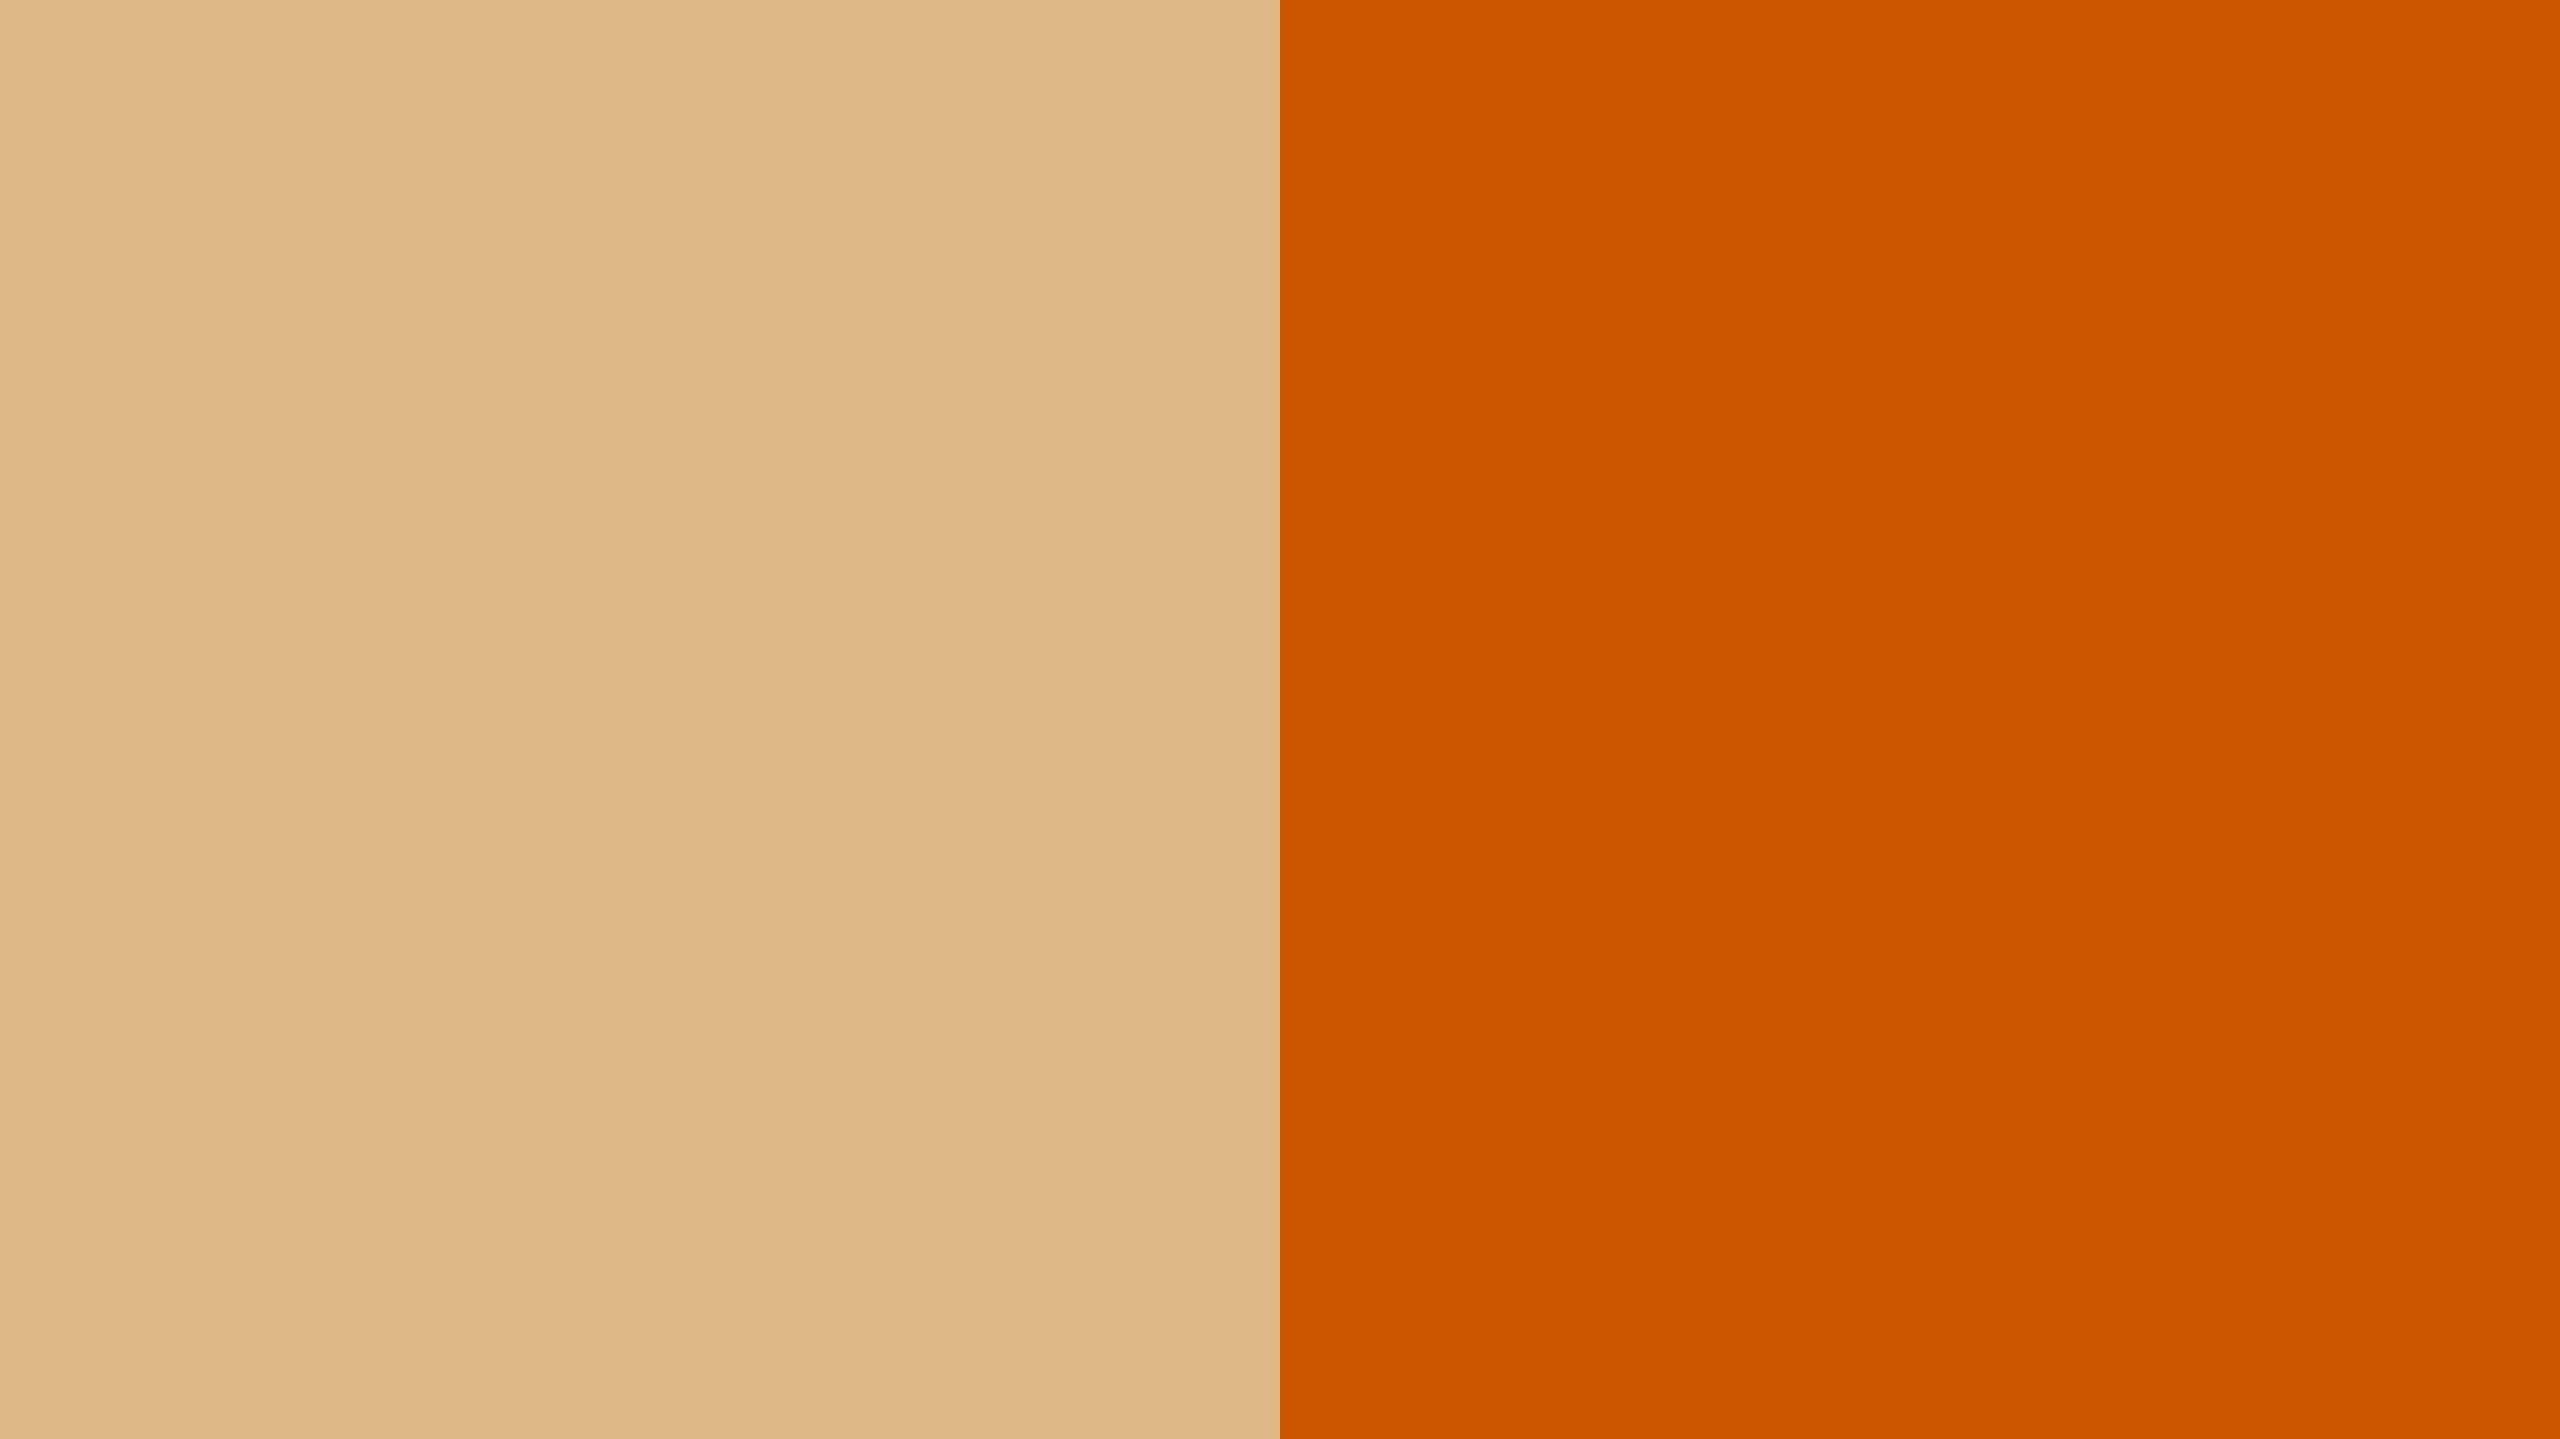 Free download resolution Burlywood and Burnt Orange solid two